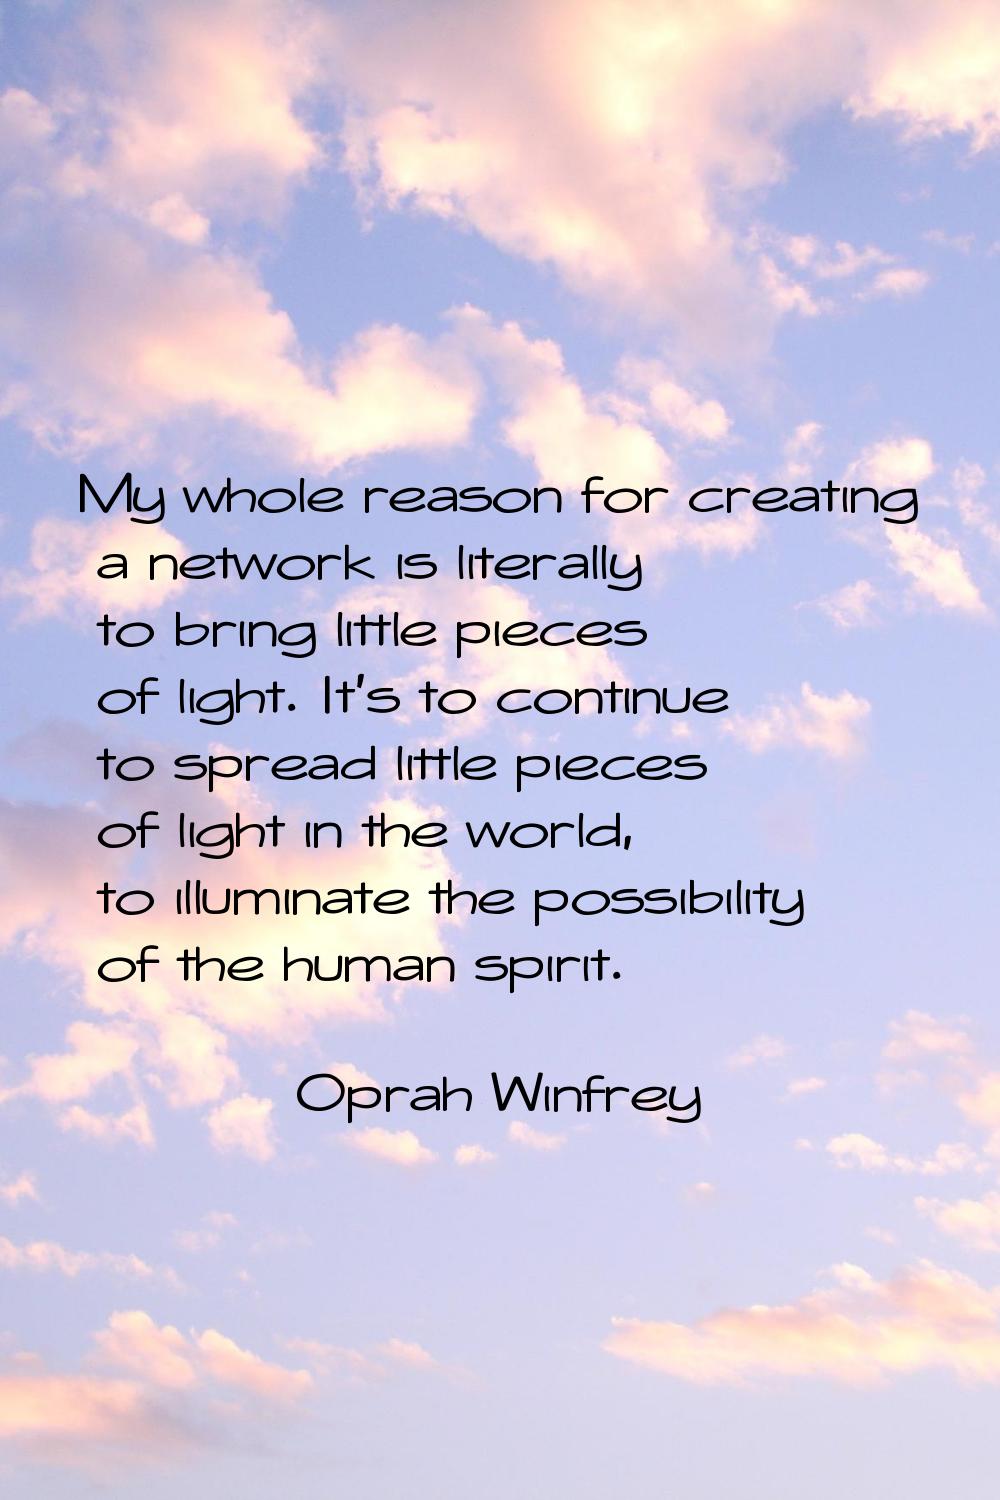 My whole reason for creating a network is literally to bring little pieces of light. It's to contin